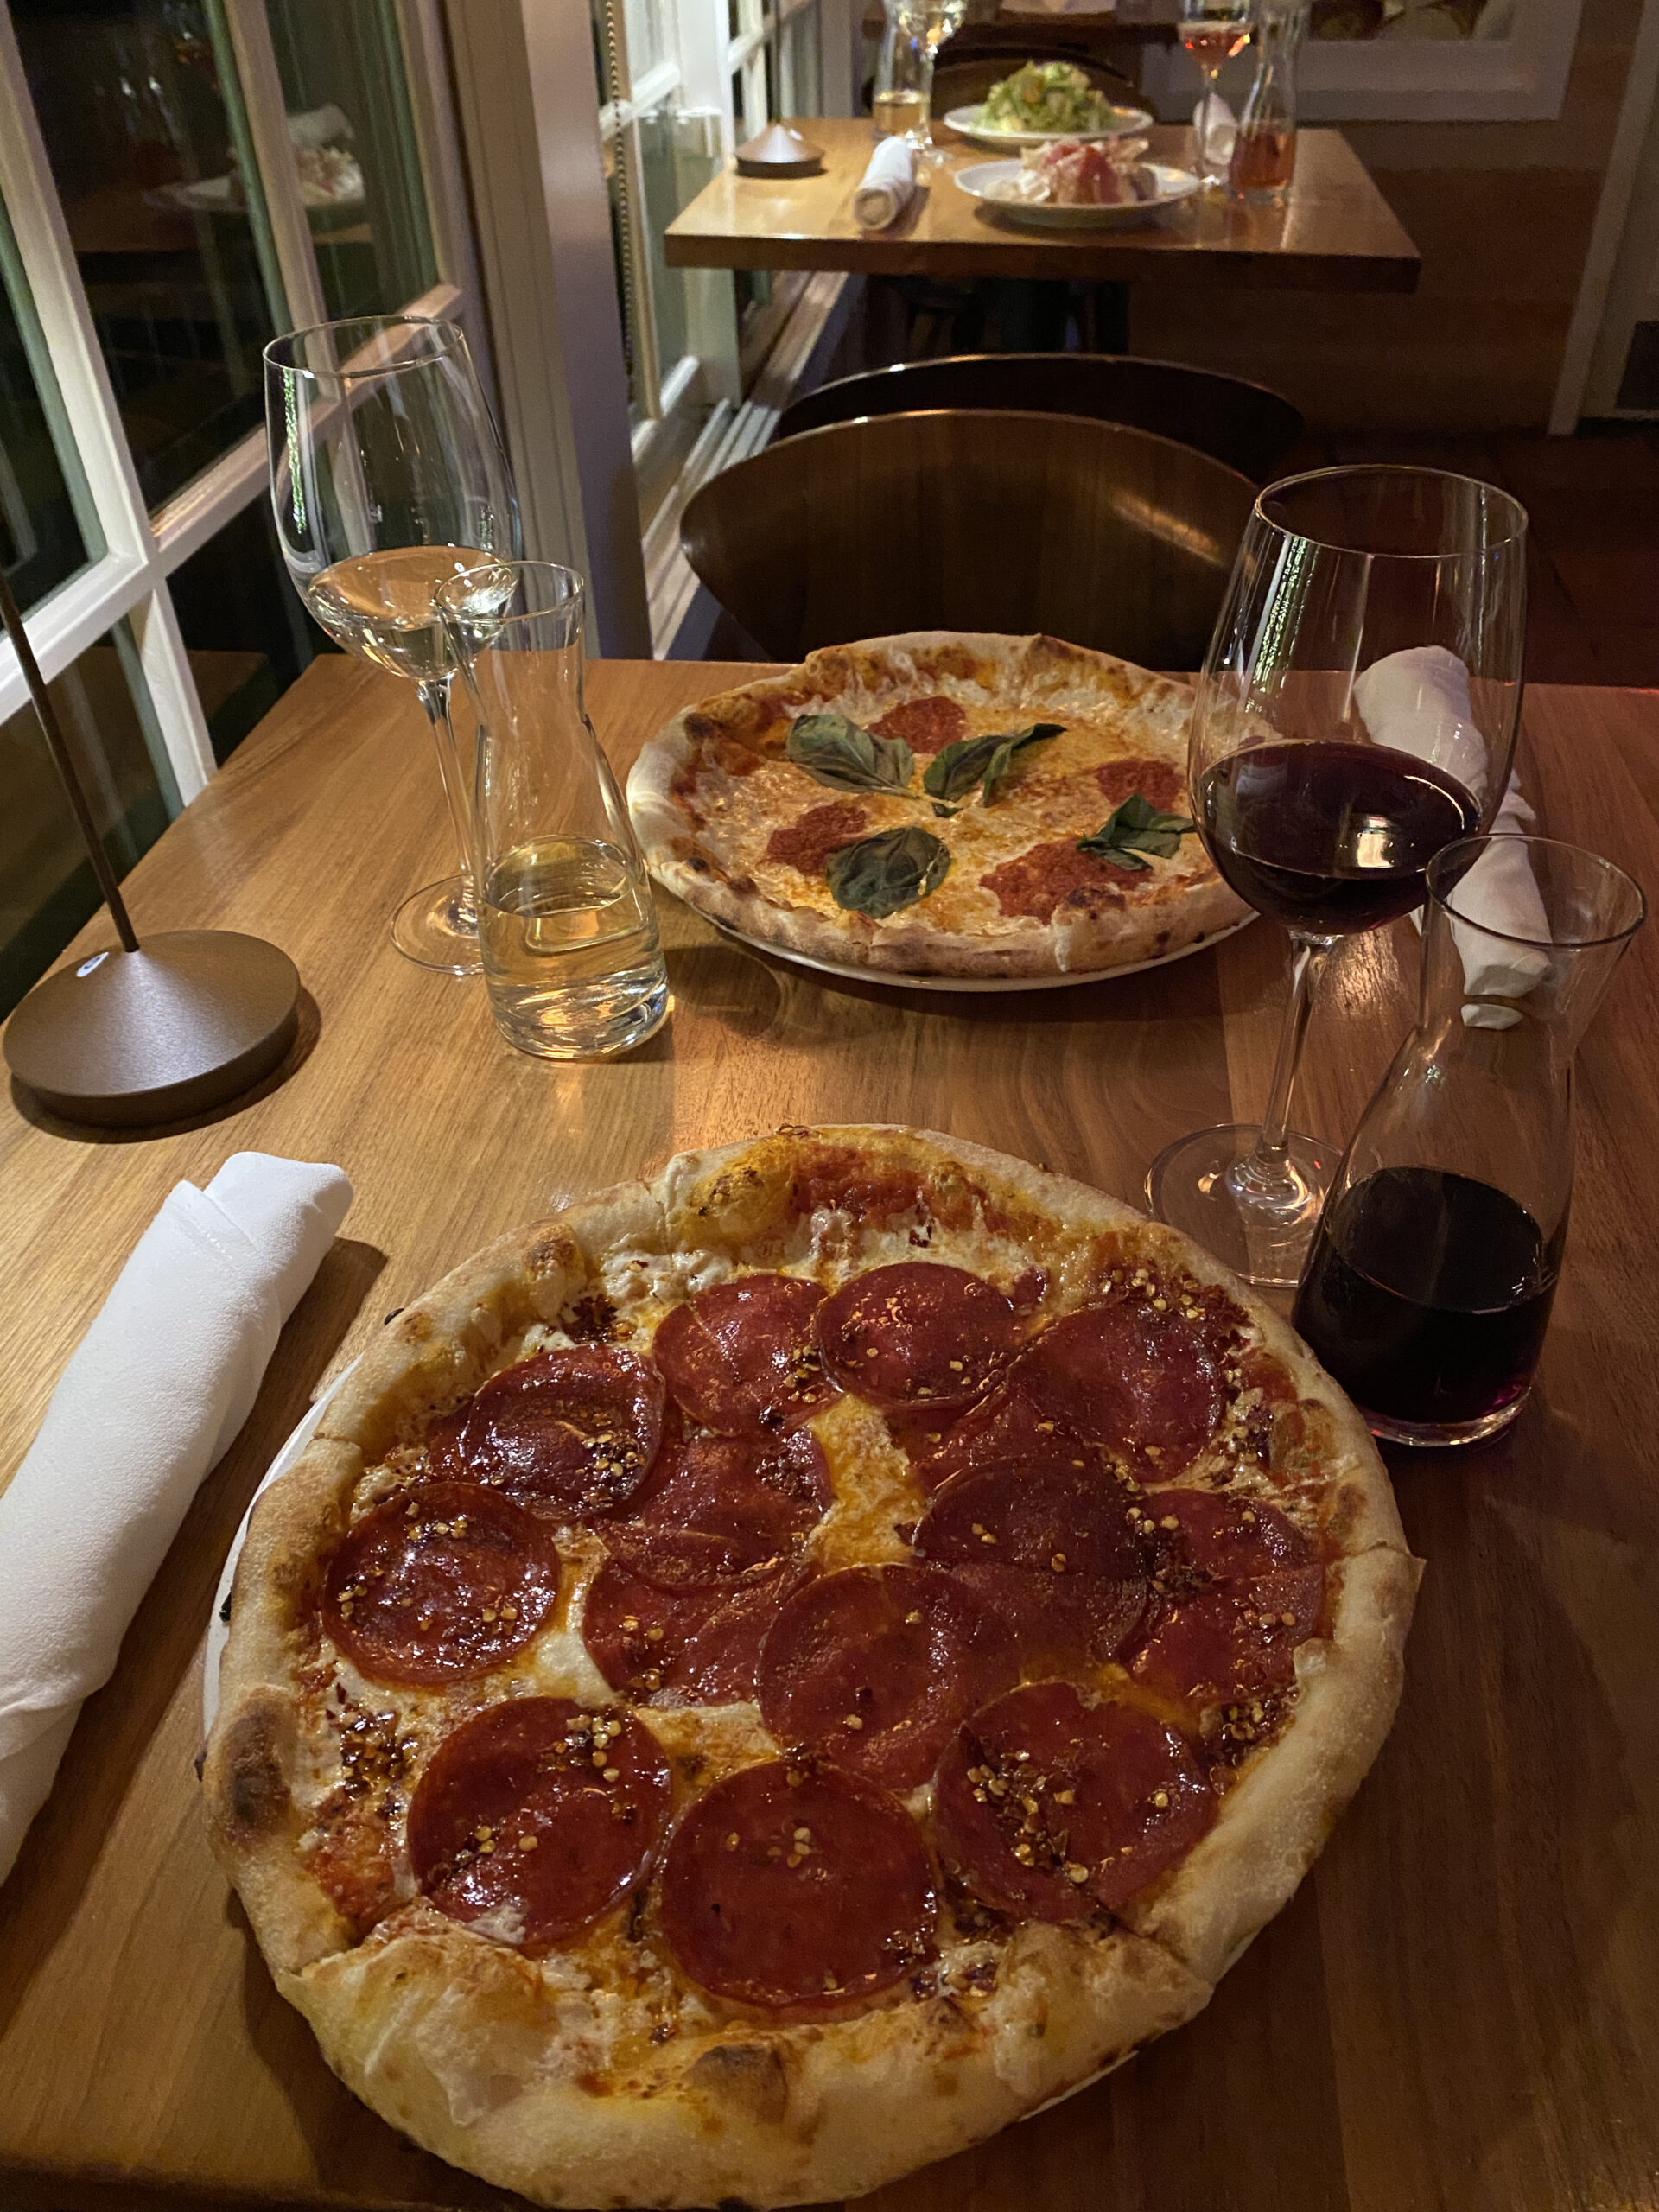 Pizza and wine special is offered at the bar at Nick & Toni's. COURTESY NICK & TONI'S